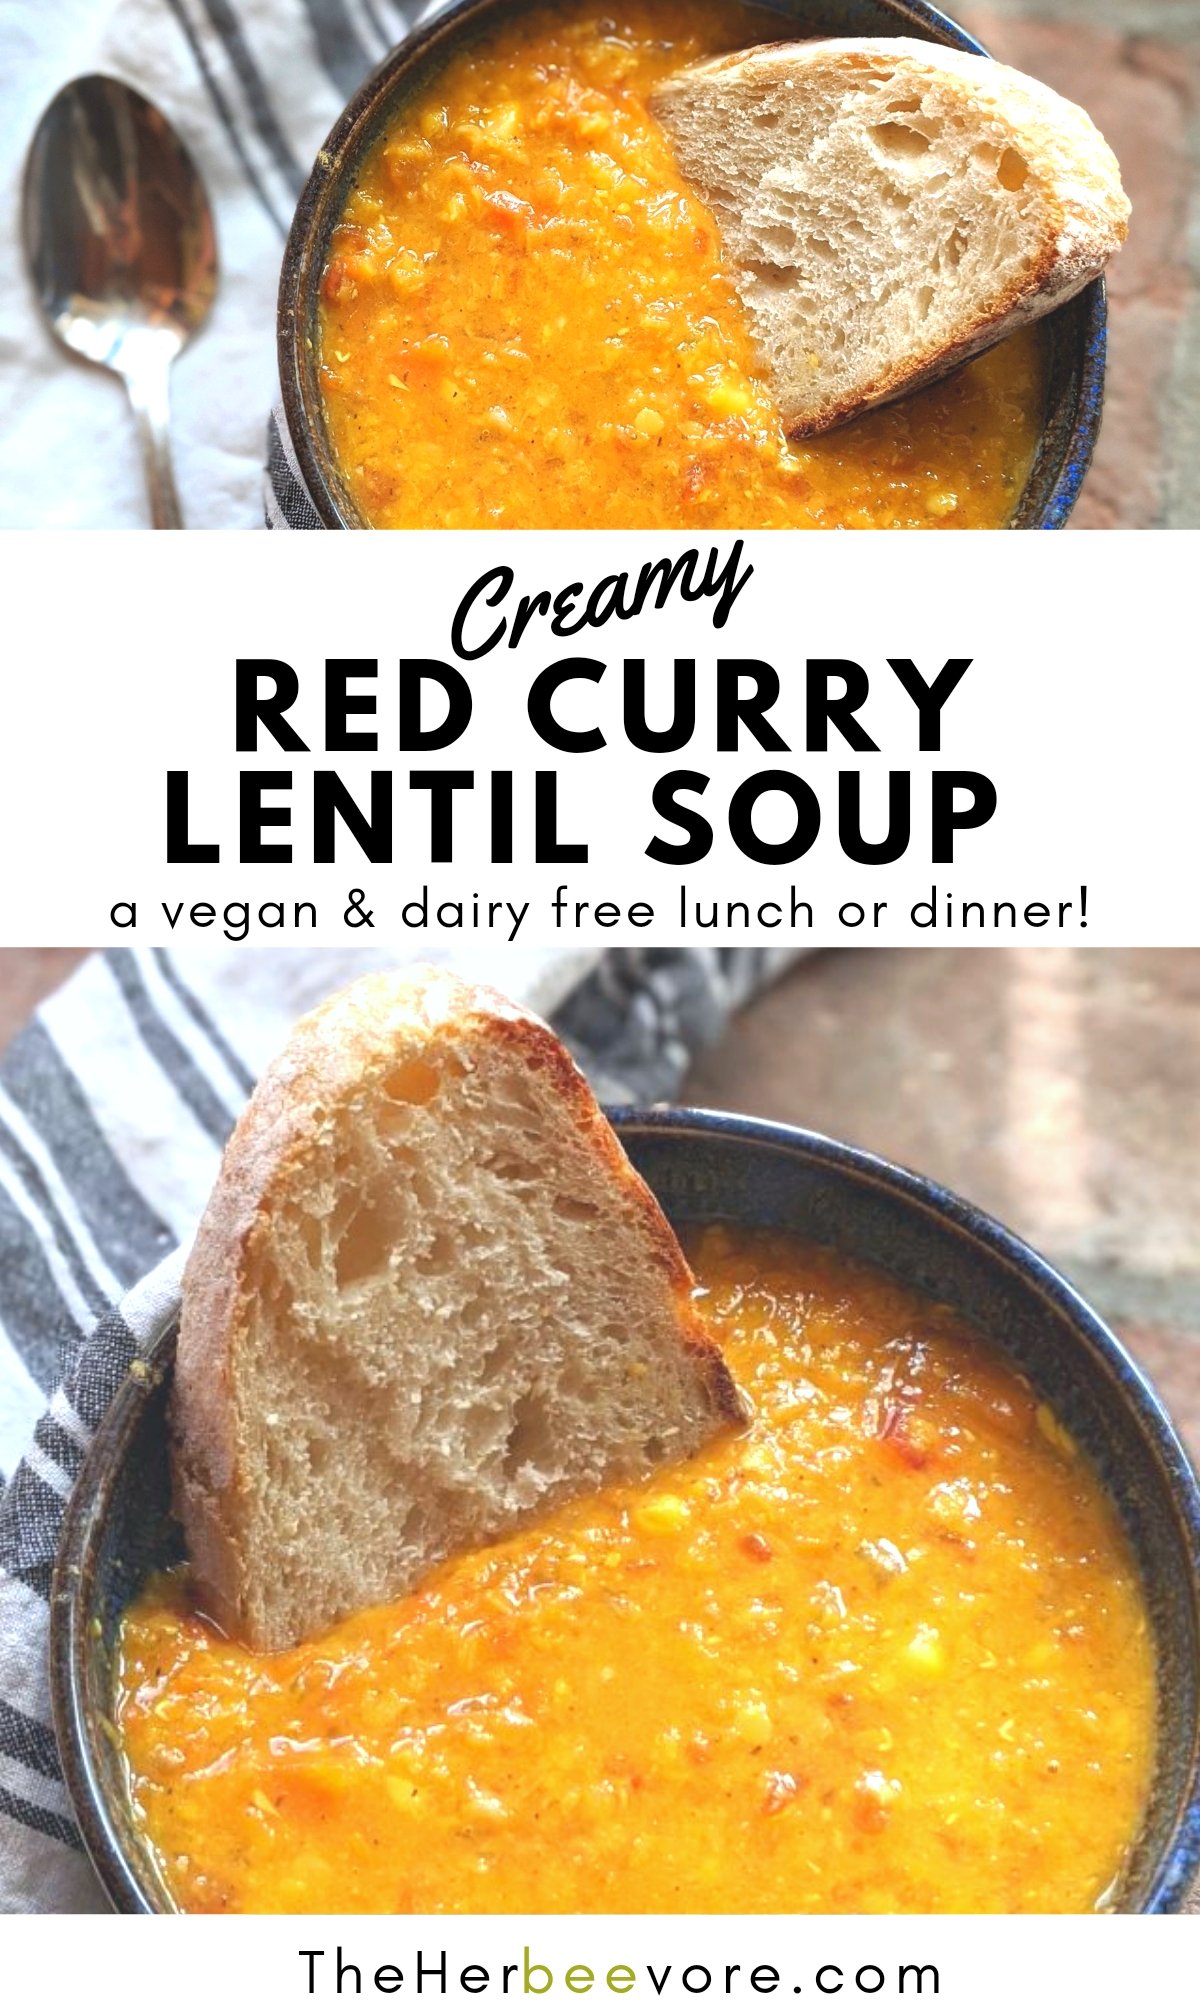 red curry lentil soup recipe with roasted red peppers curry paste and vegetables vegan dairy free gluten free